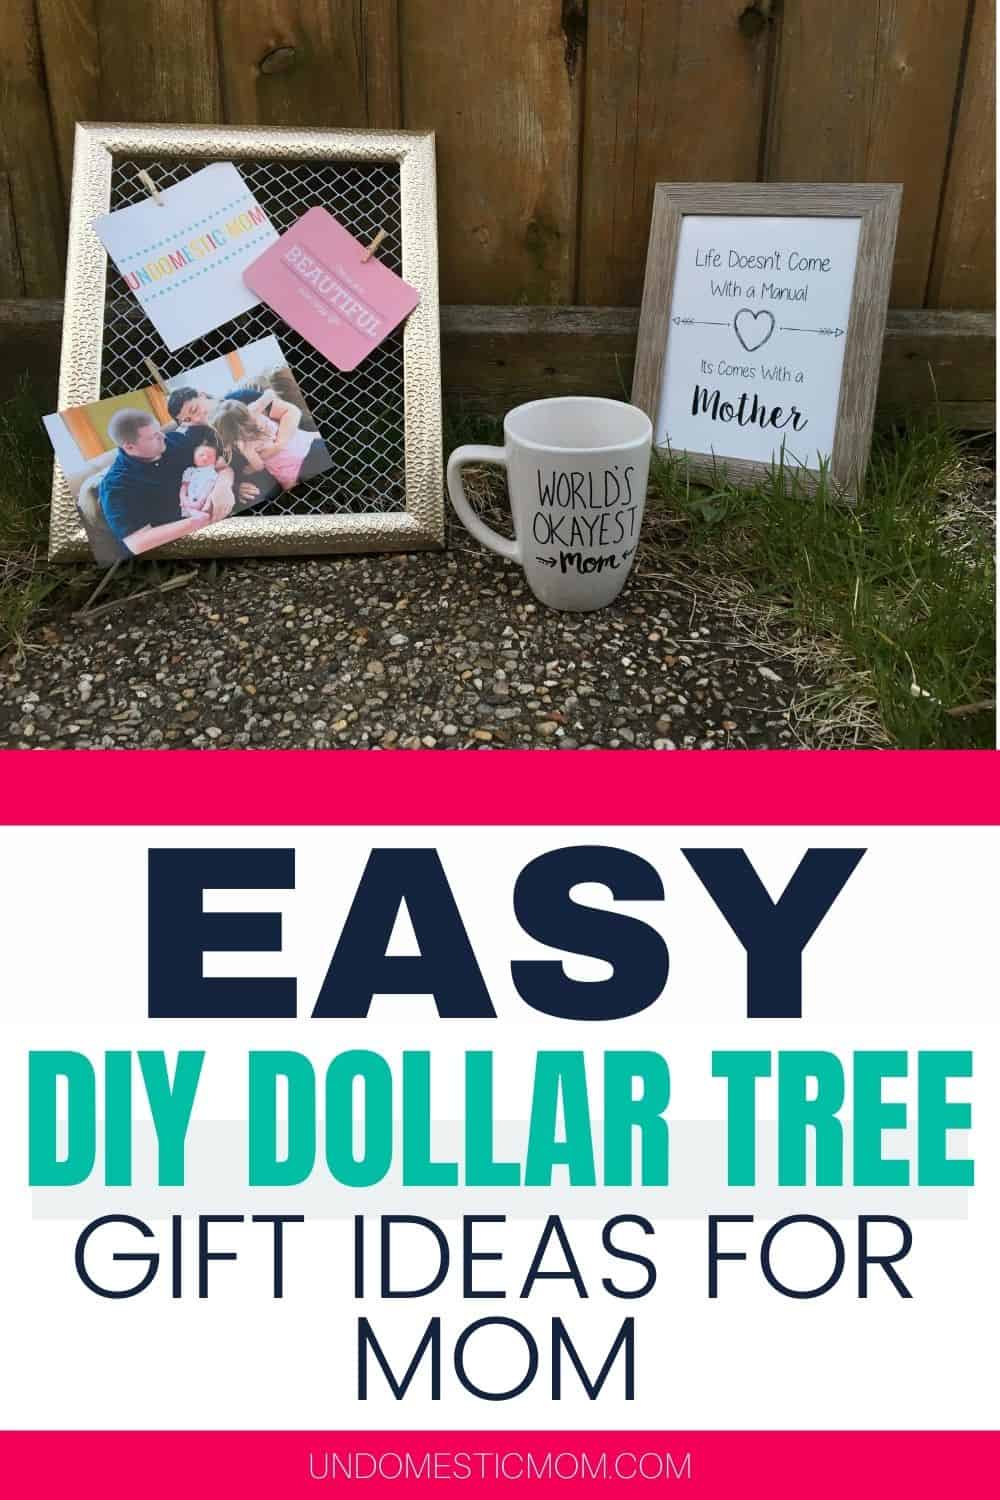 5 Crazy Cheap Christmas Gift Baskets From the Dollar Store Under $10  Diy  christmas gifts cheap, Cheap christmas gifts, Cheap christmas diy